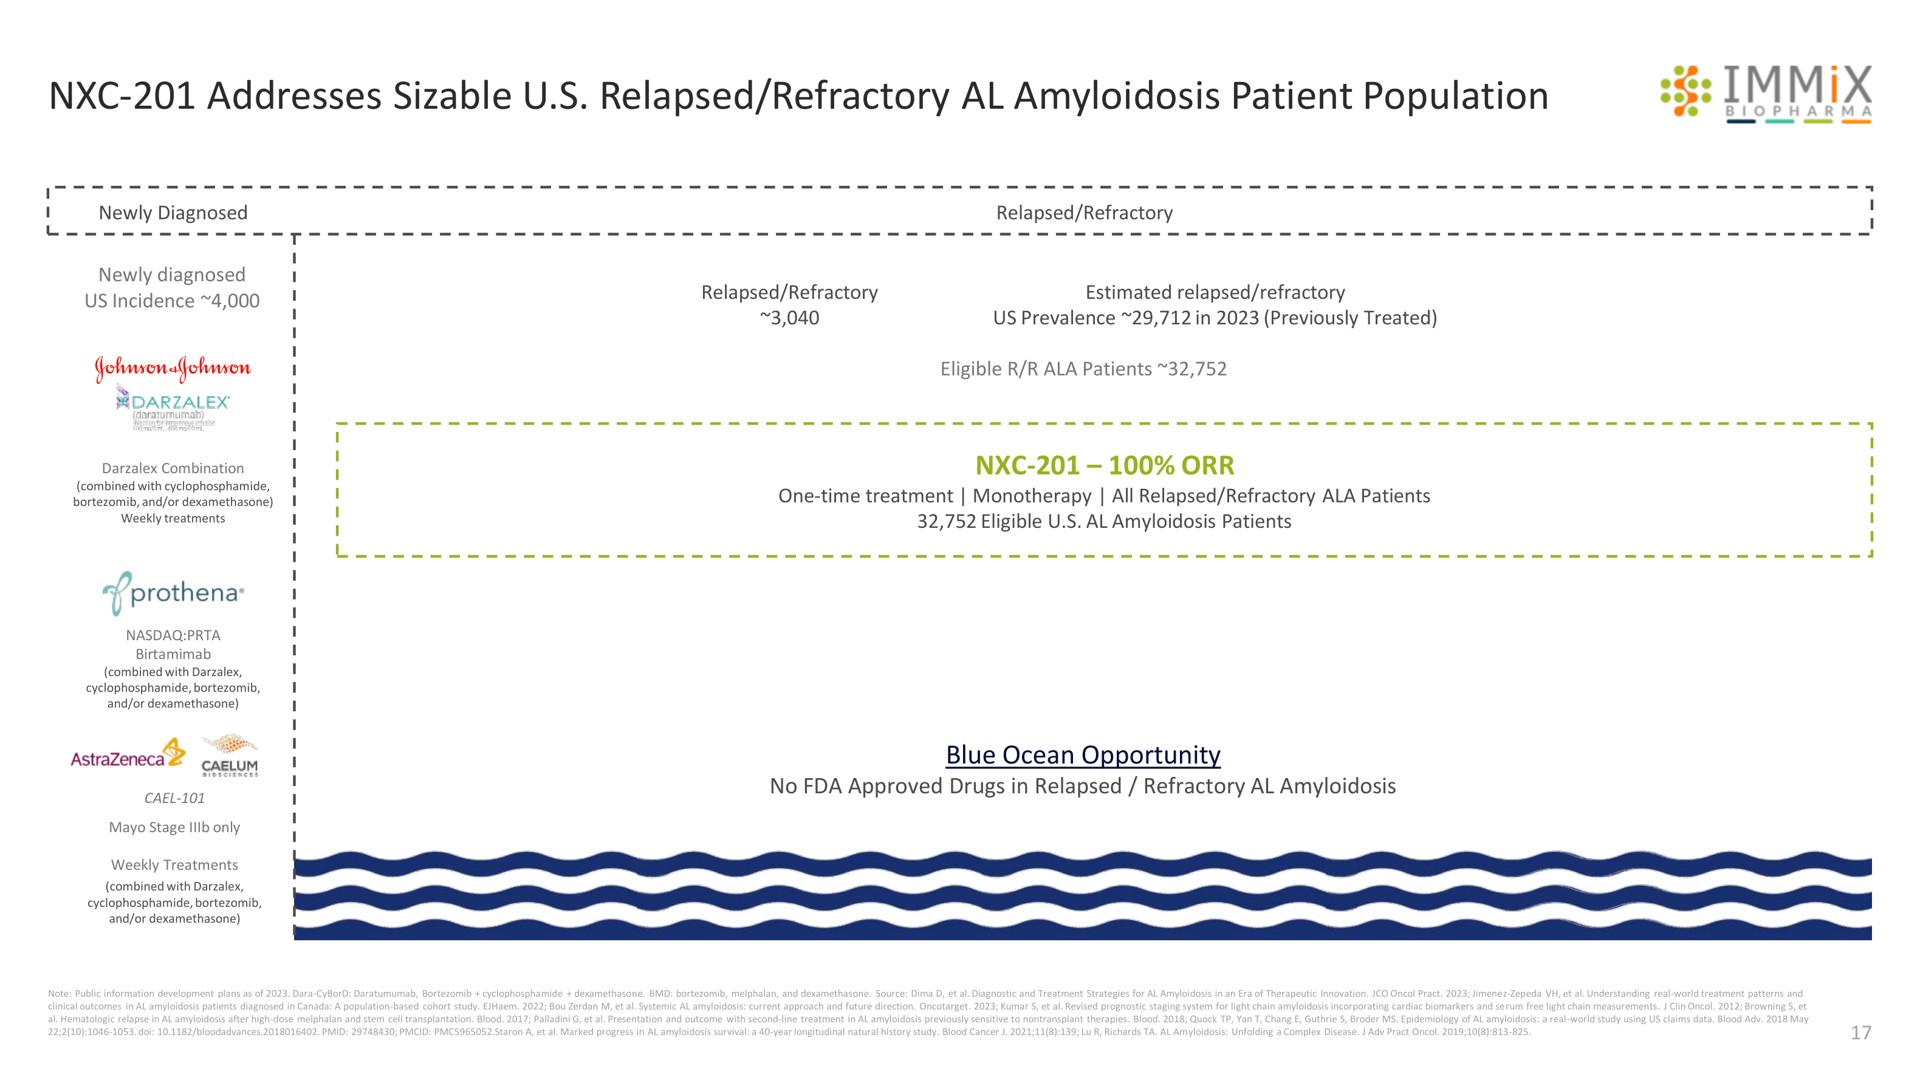 addresses sizable relapsed refractory amyloidosis patient population | Immix Biopharma